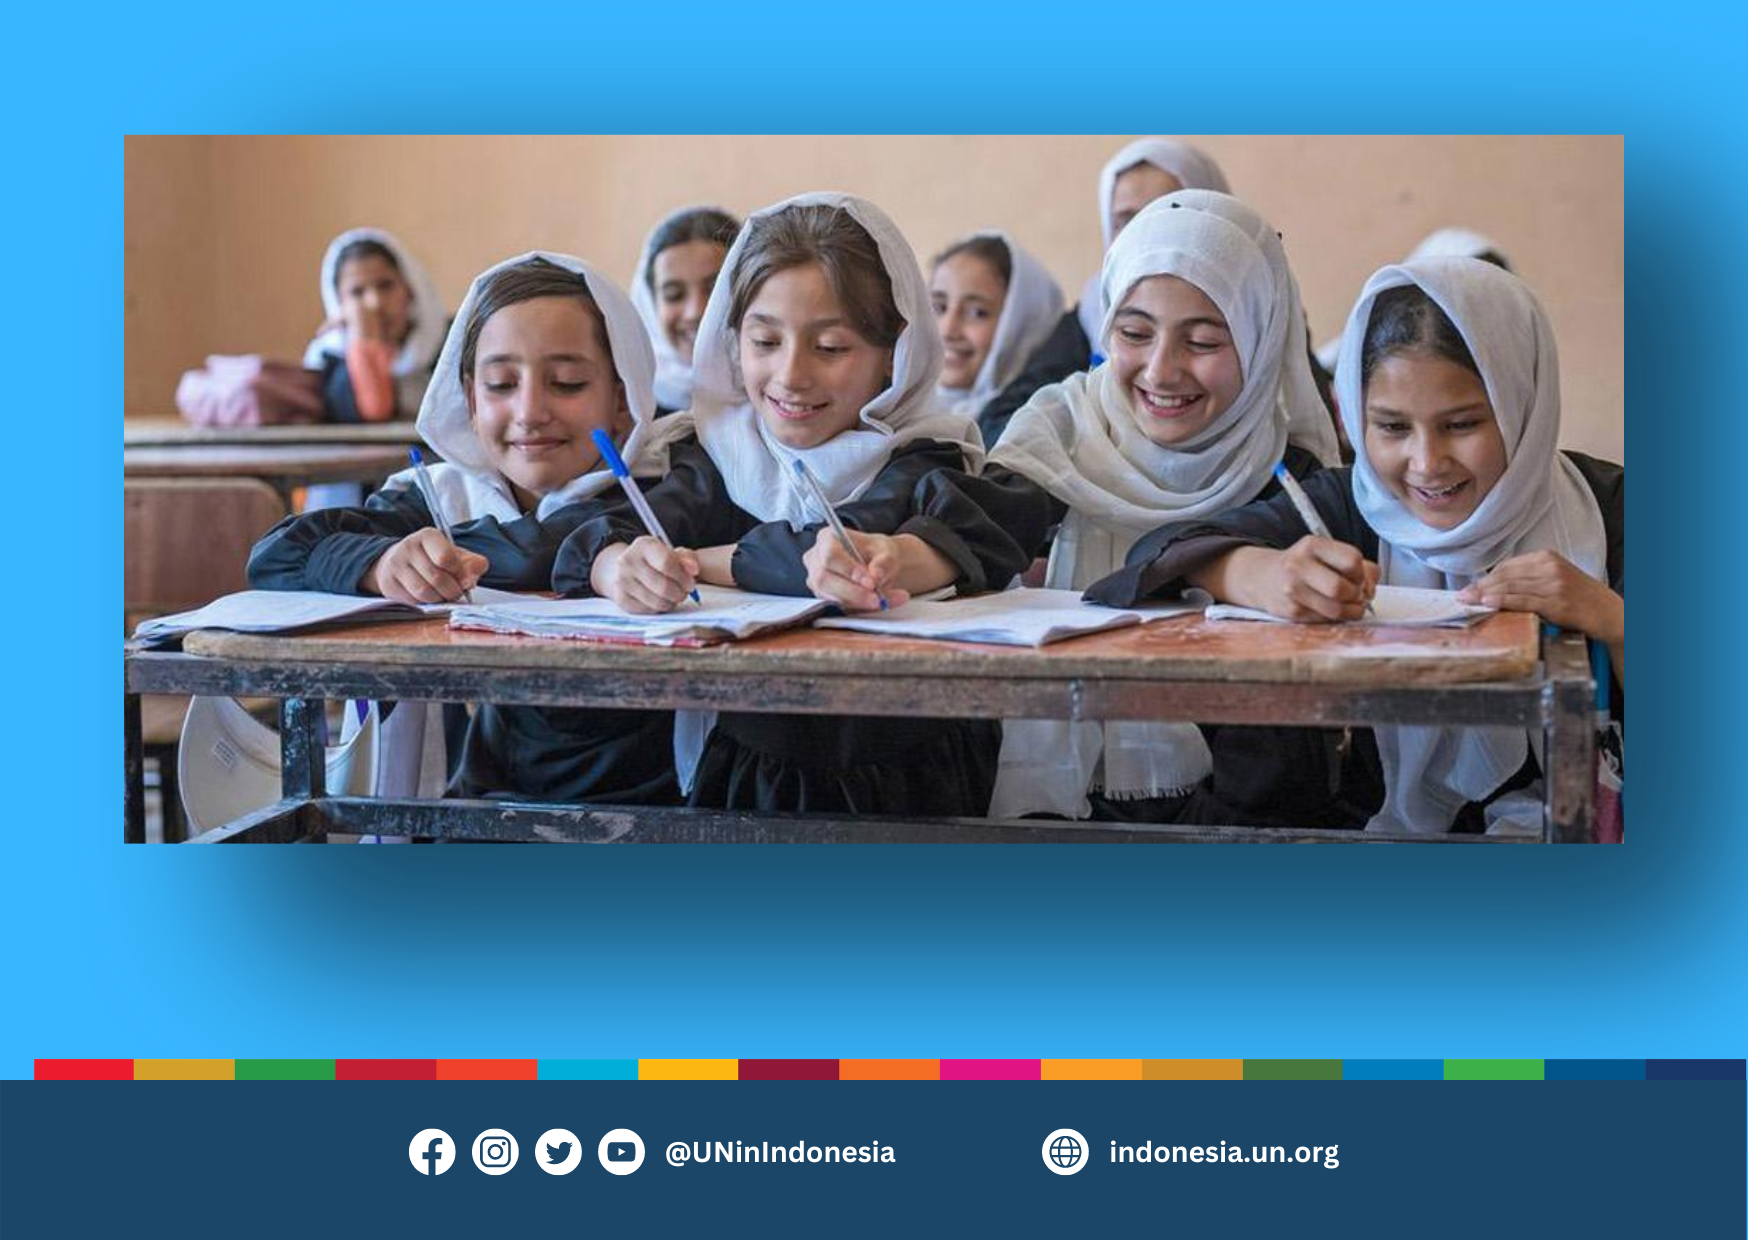 Young girls study at a school in Mazar-i-Sharīf, Balkh Province, Afghanistan.